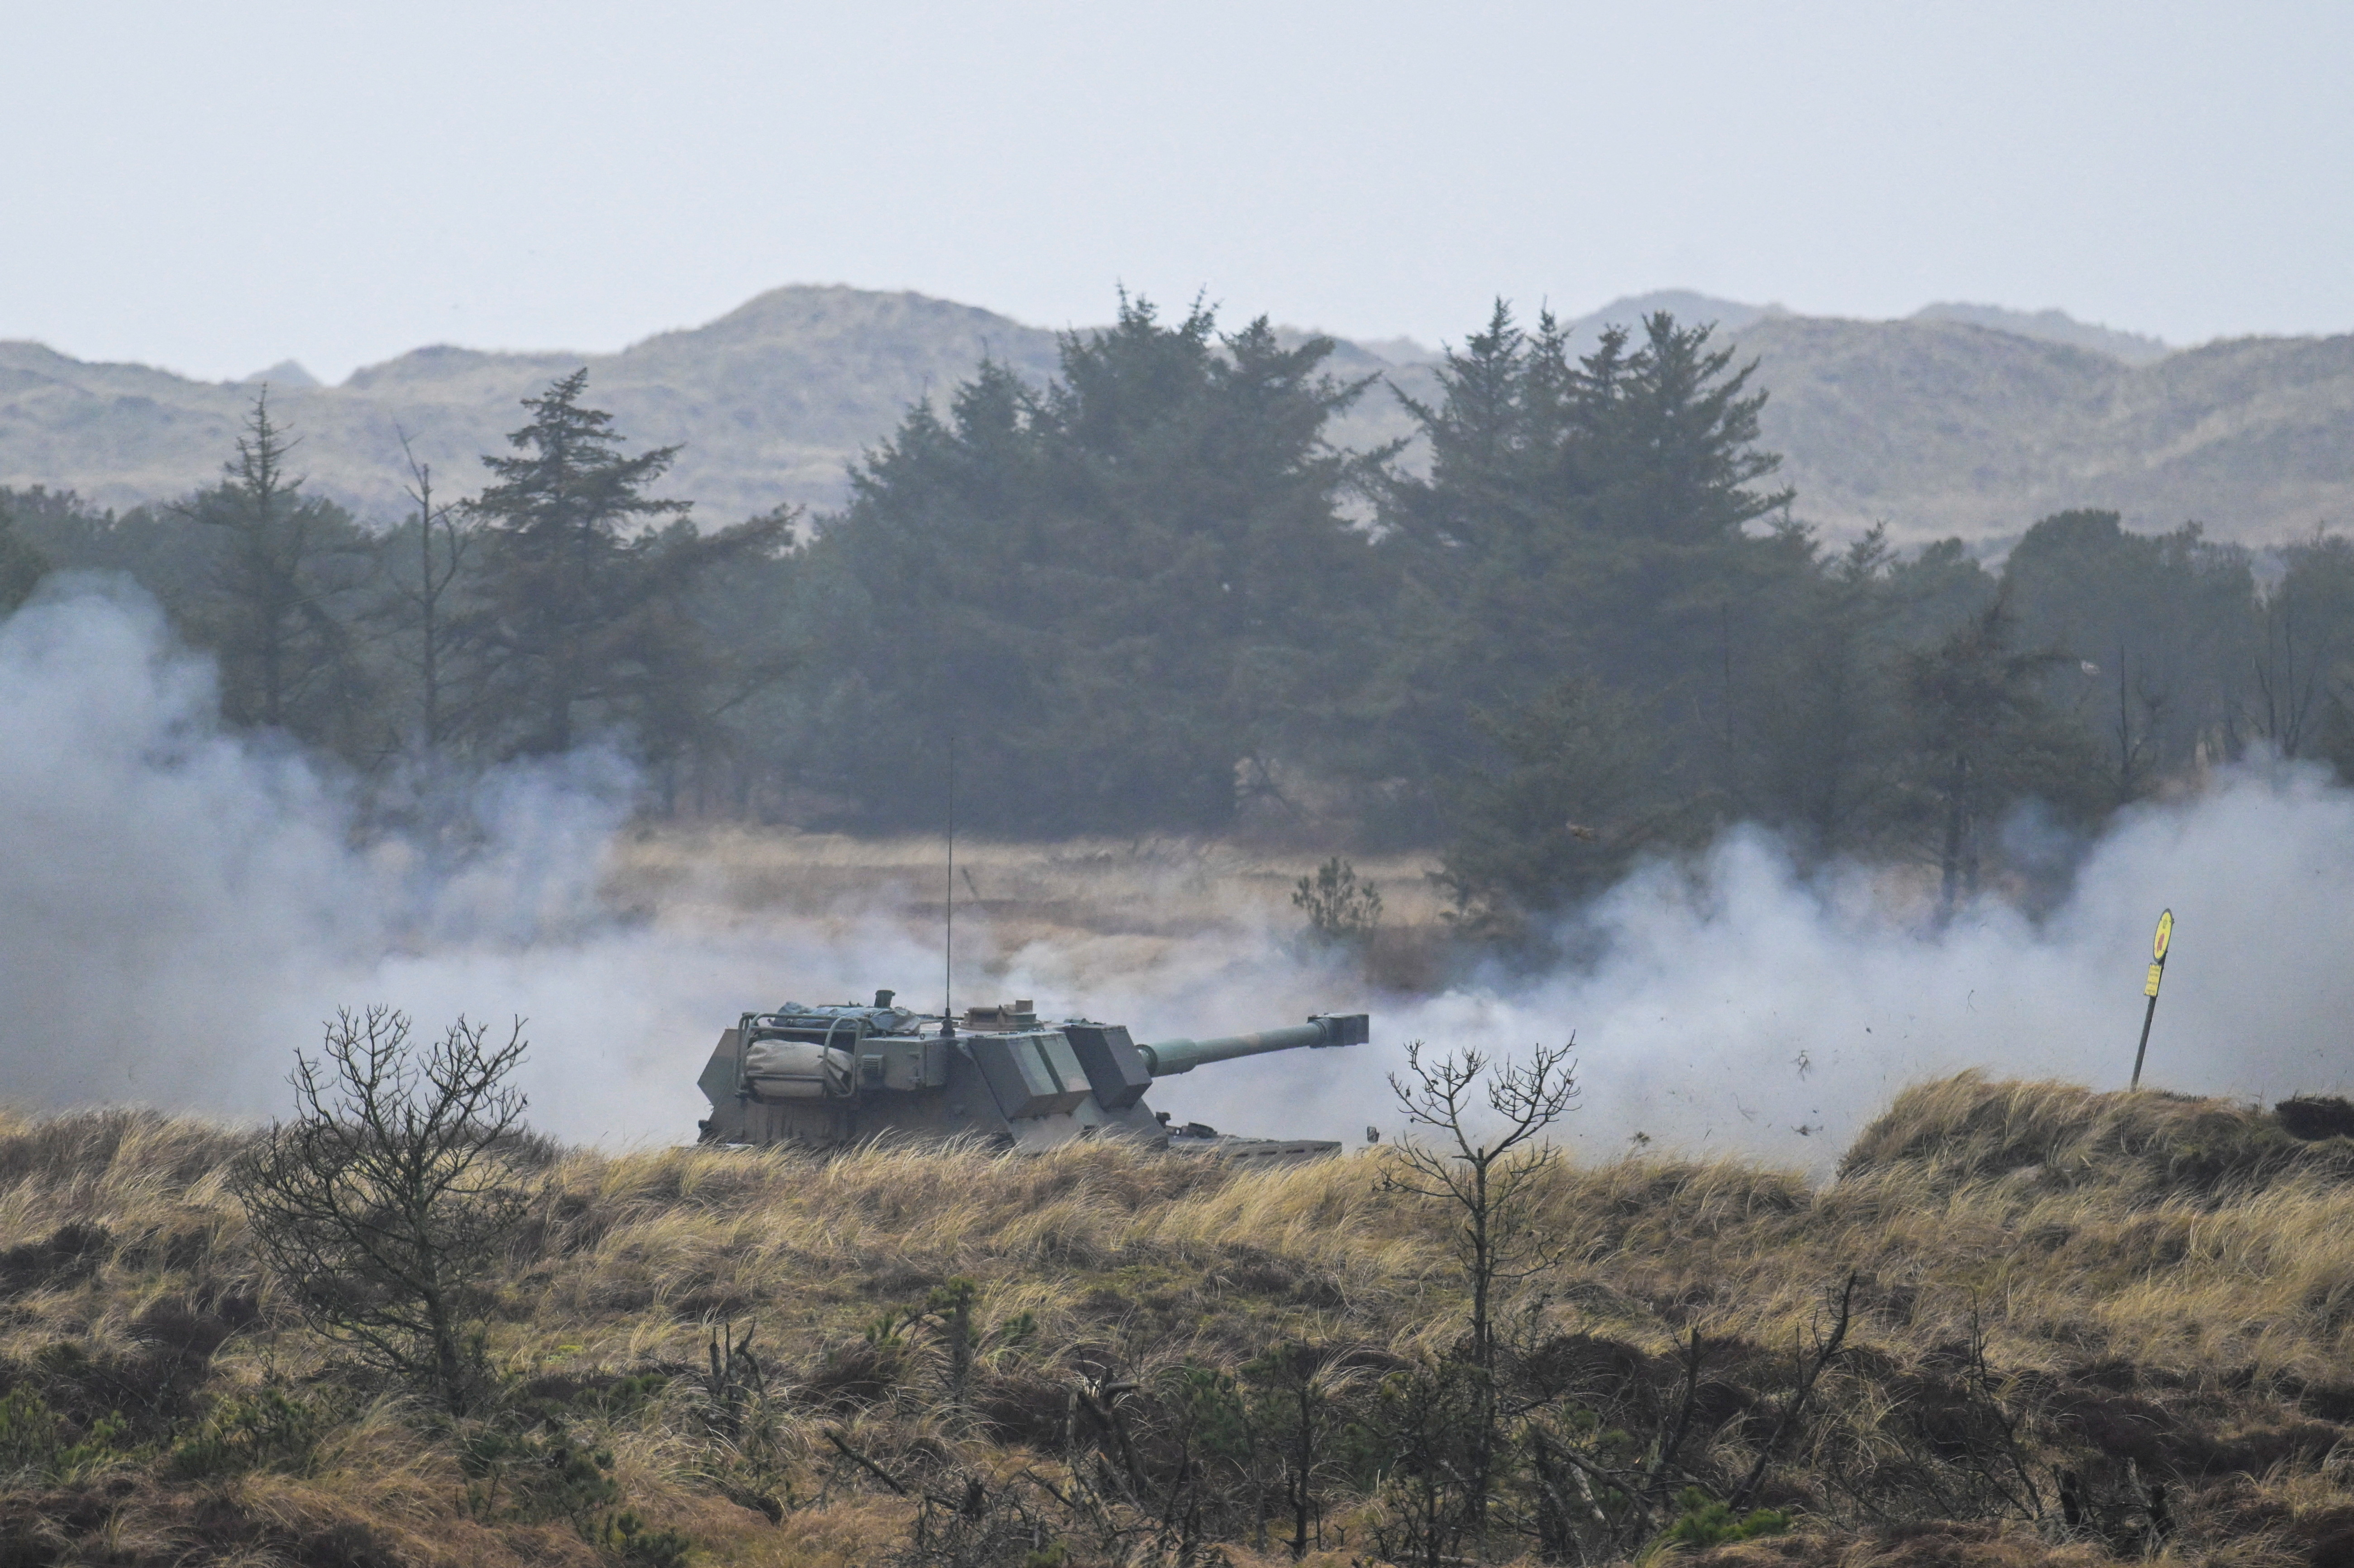 Dynamic Front military exercise led by the United States takes place in a training area, in Oksbol